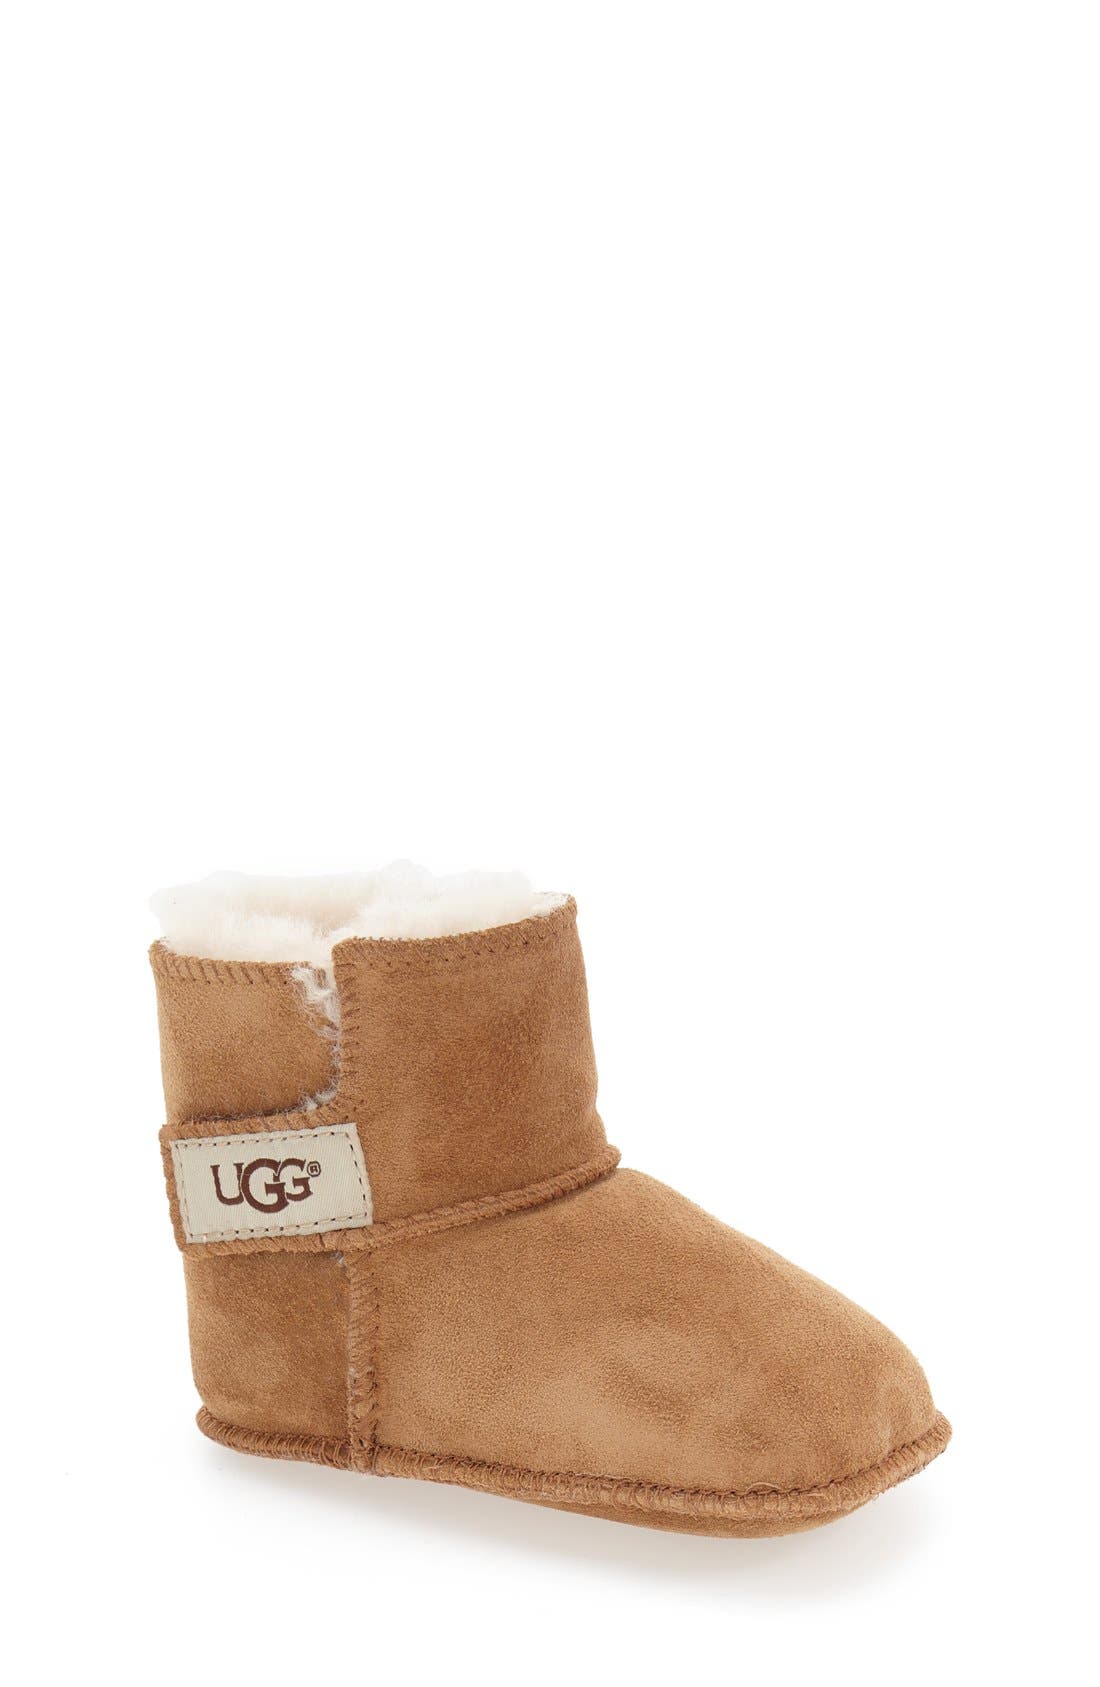 uggs size 4